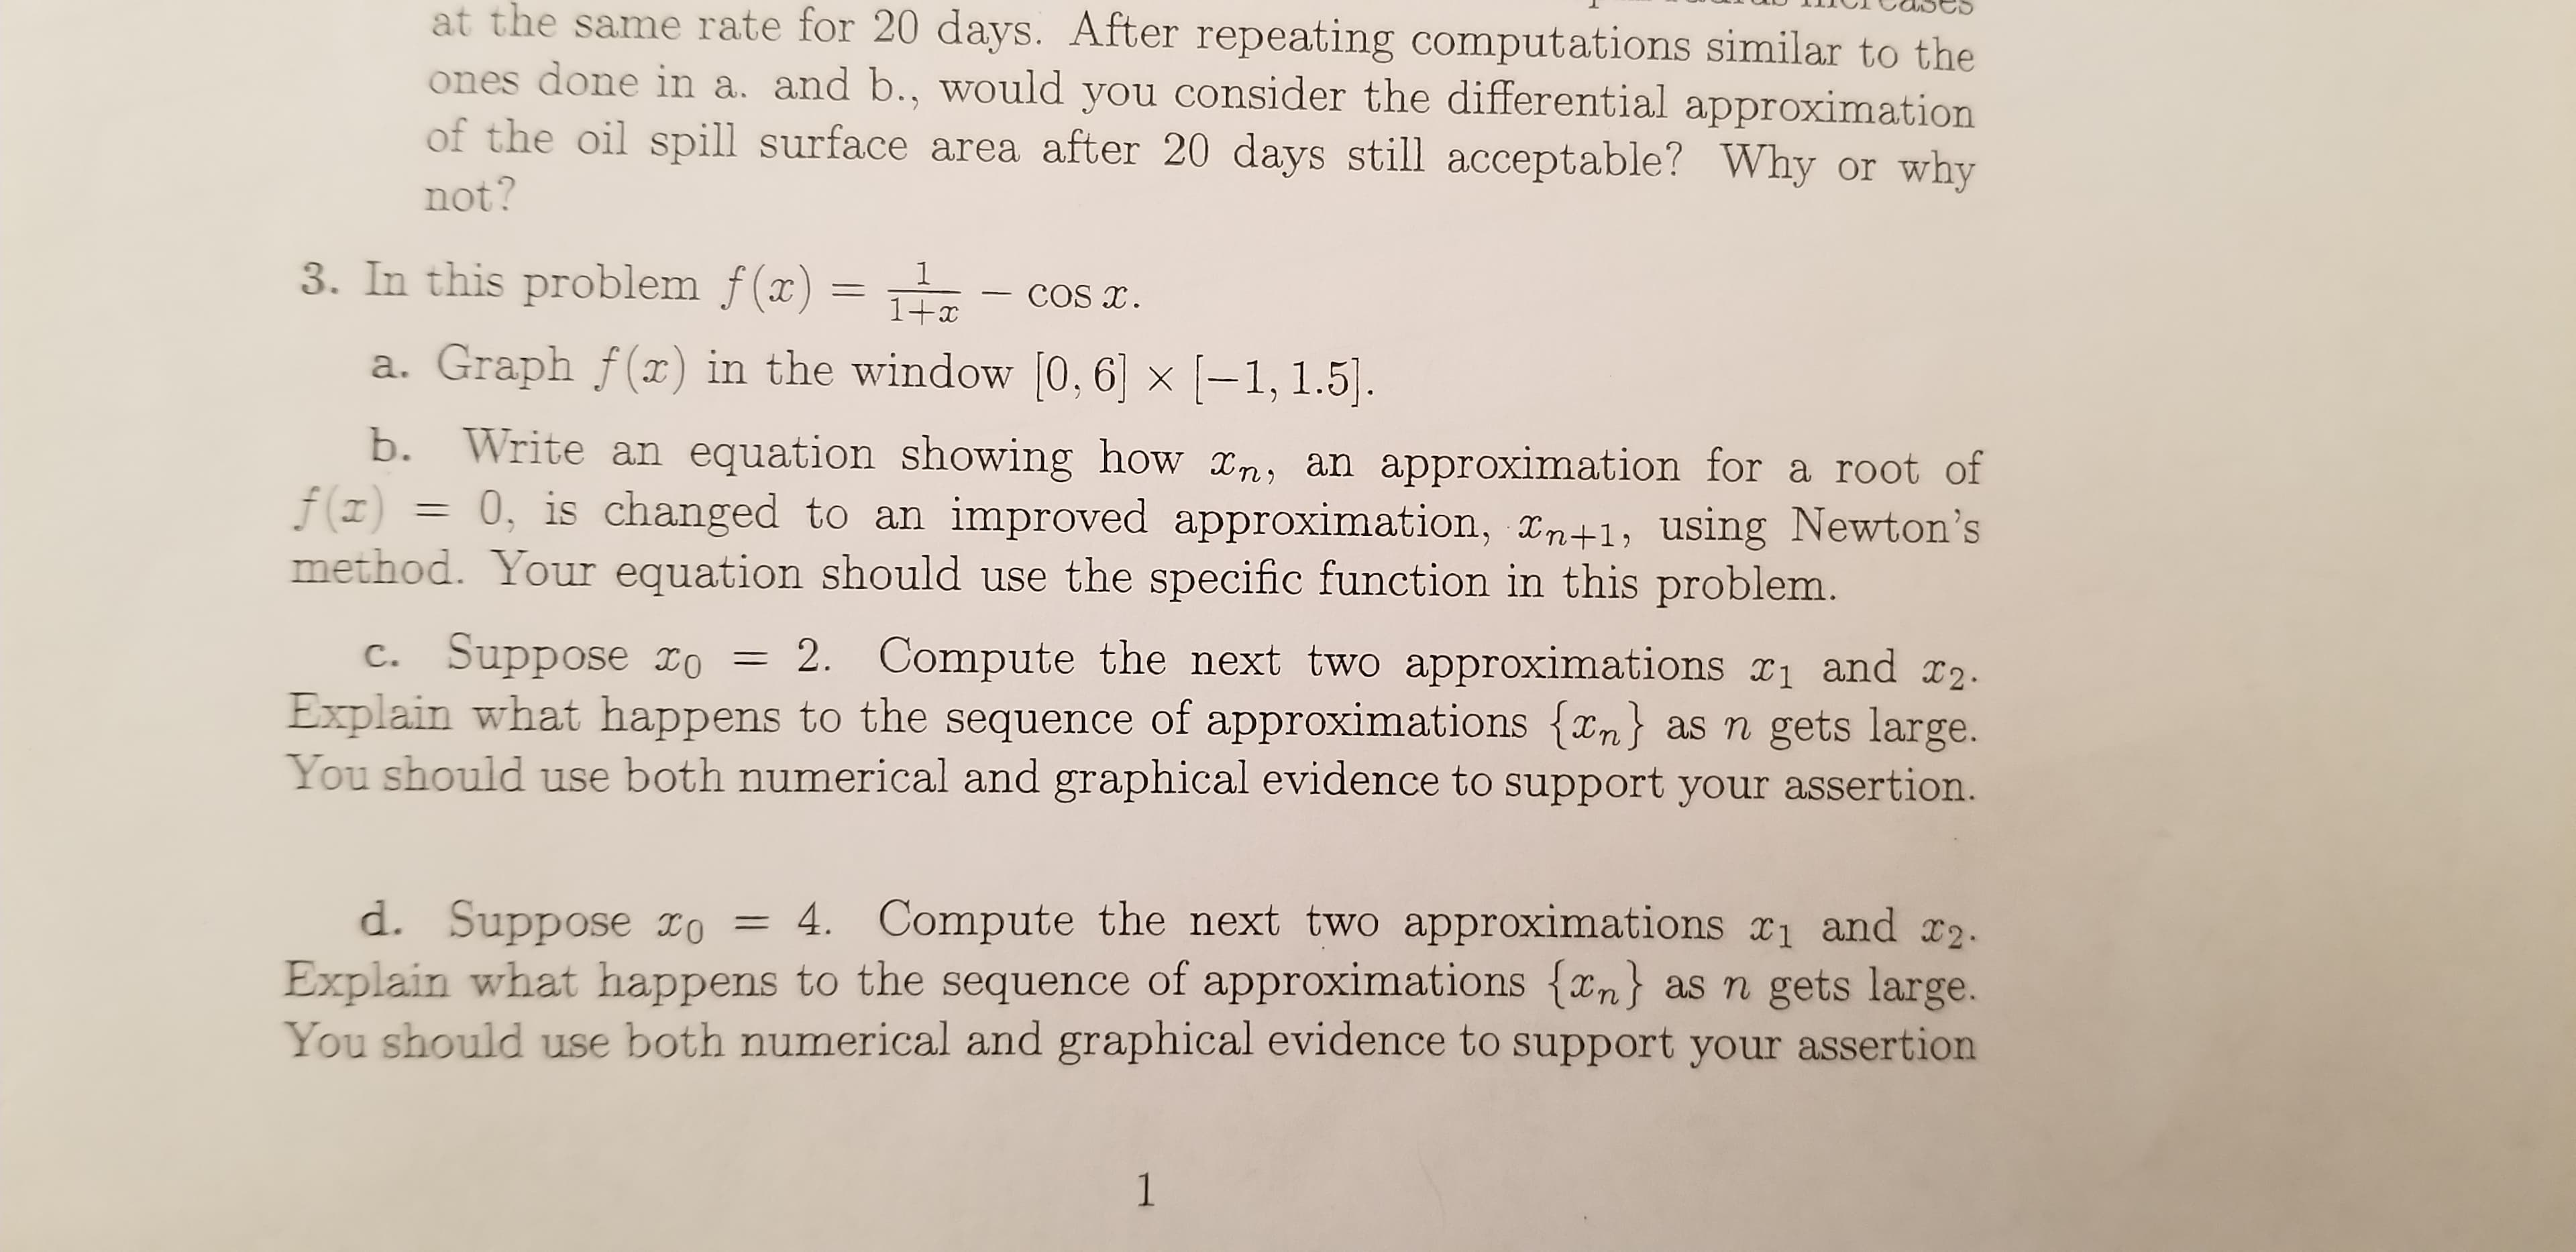 at the same rate for 20 days. After repeating computations similar to the
ones done in a. and b., would you consider the differential approximation
of the oil spill surface area after 20 days still acceptable? Why or why
not?
3. In this problem f(x) =
1
COS T
1+x
a. Graph f(x) in the window [0,6 x -1, 1.5.
b. Write an equation showing how x,n, an approximation for a root of
f(z)
0, is changed to an improved approximation, Tn+1, using Newton's
method. Your equation should use the specific function in this problem.
c. Suppose IO
Explain what happens to the sequence of approximations {xn as n gets large.
You should use both numerical and graphical evidence to support your assertion.
2. Compute the next two approximations r1 and r2
d. Suppose IO = 4. Compute the next two approximations x1 and I2.
Explain what happens to the sequence of approximations {xn} as n gets large.
You should use both numerical and graphical evidence to support your assertion
1
